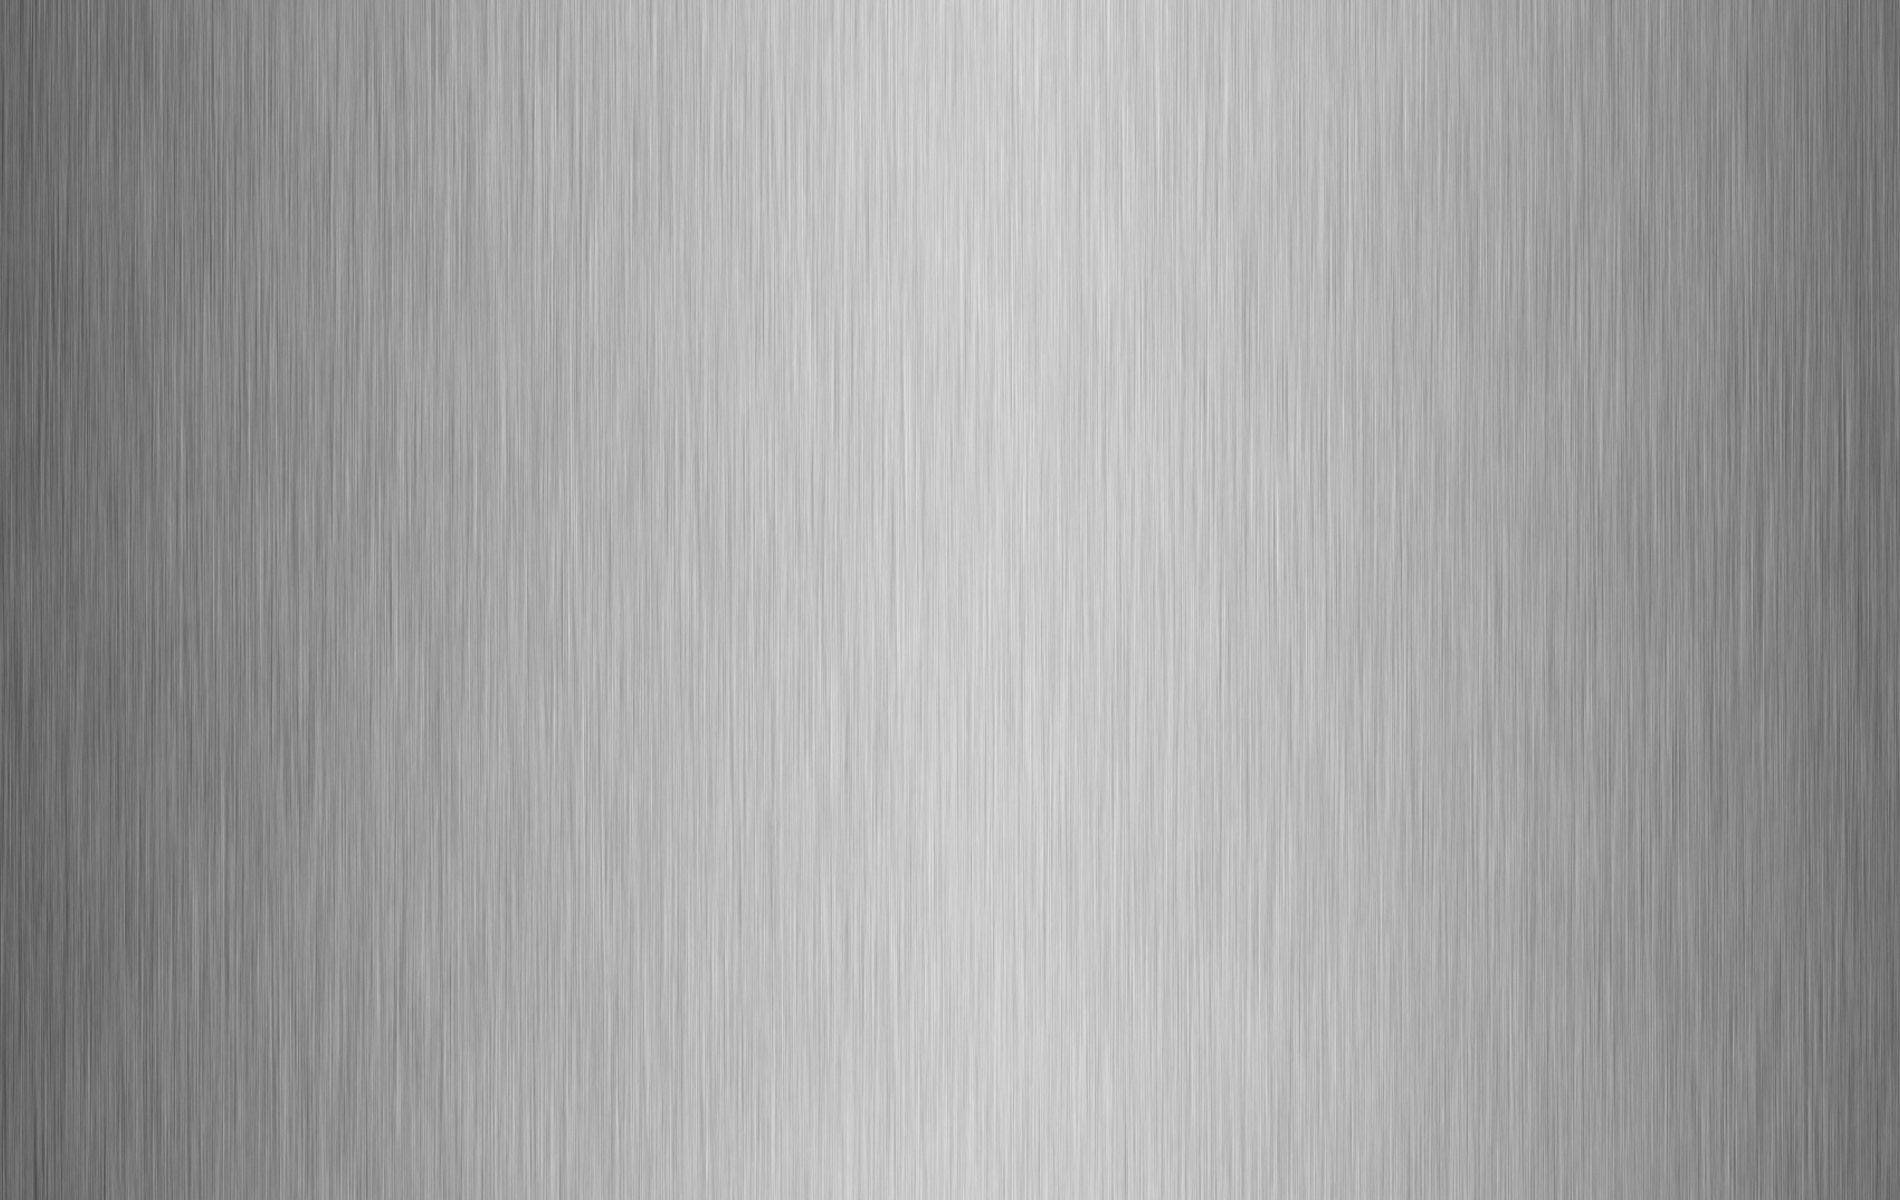 Brushed Silver Metal Surface Background